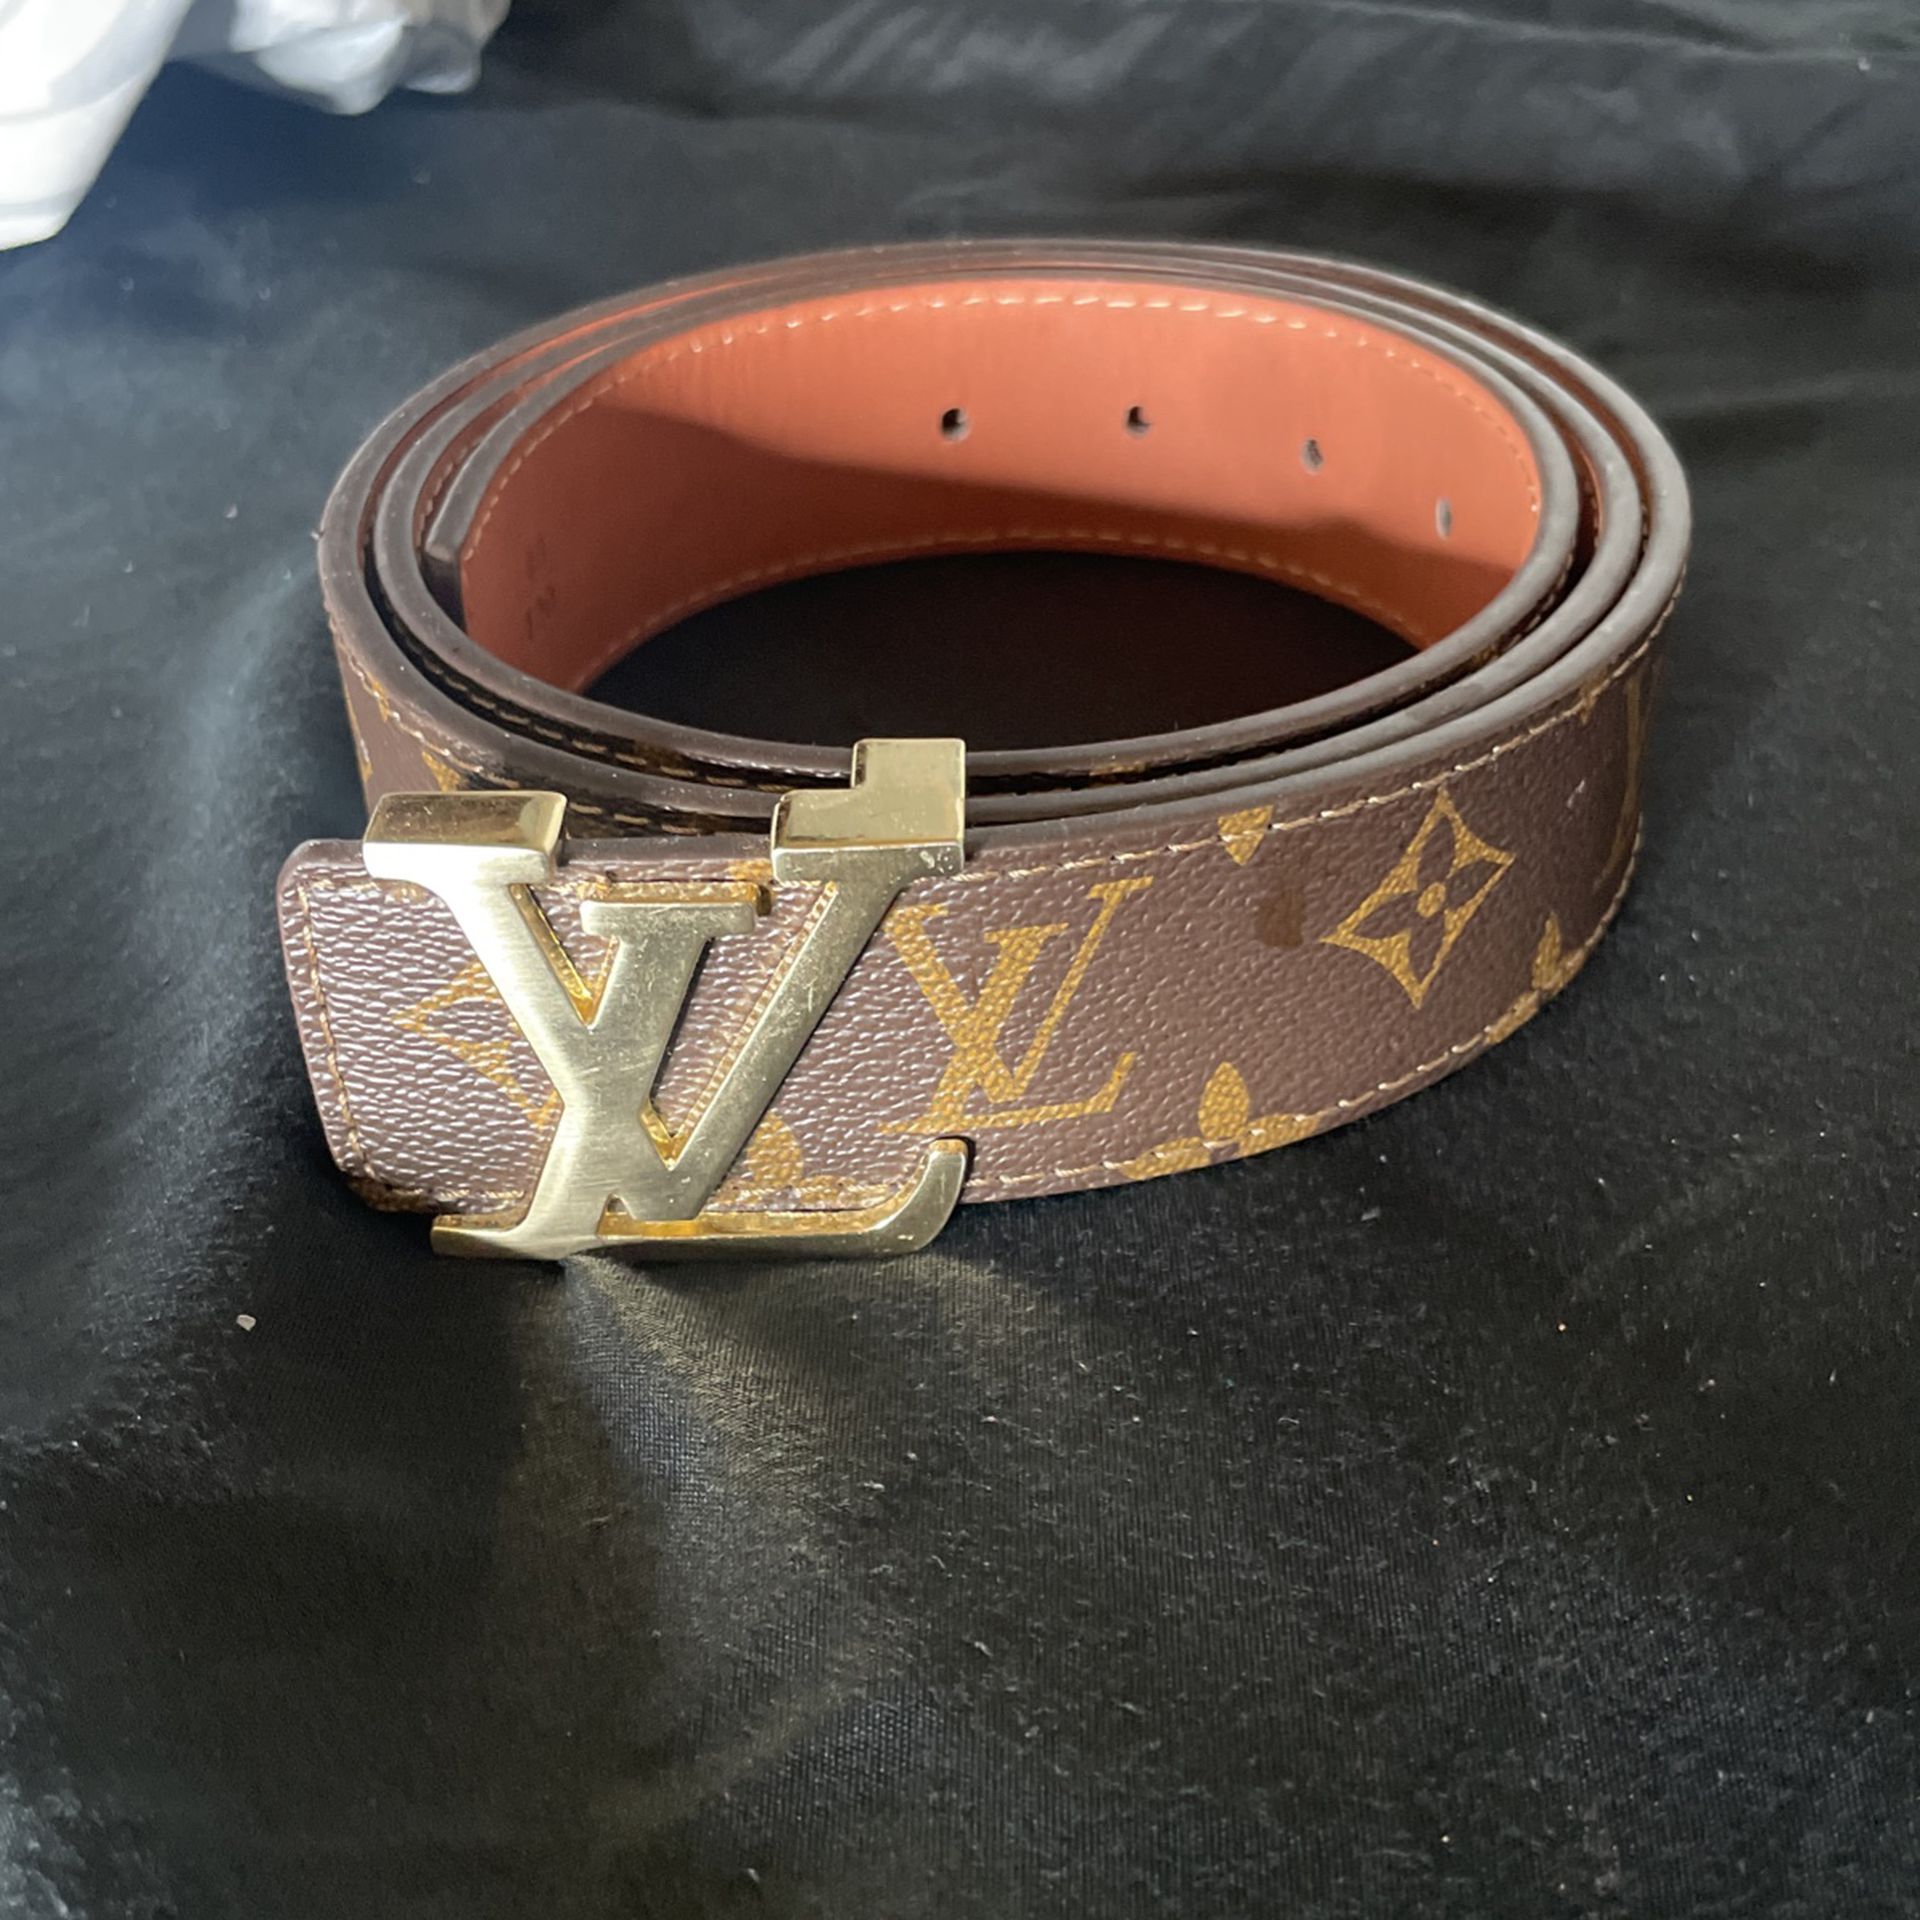 LV Pyramide Belt for Sale in Concord, CA - OfferUp